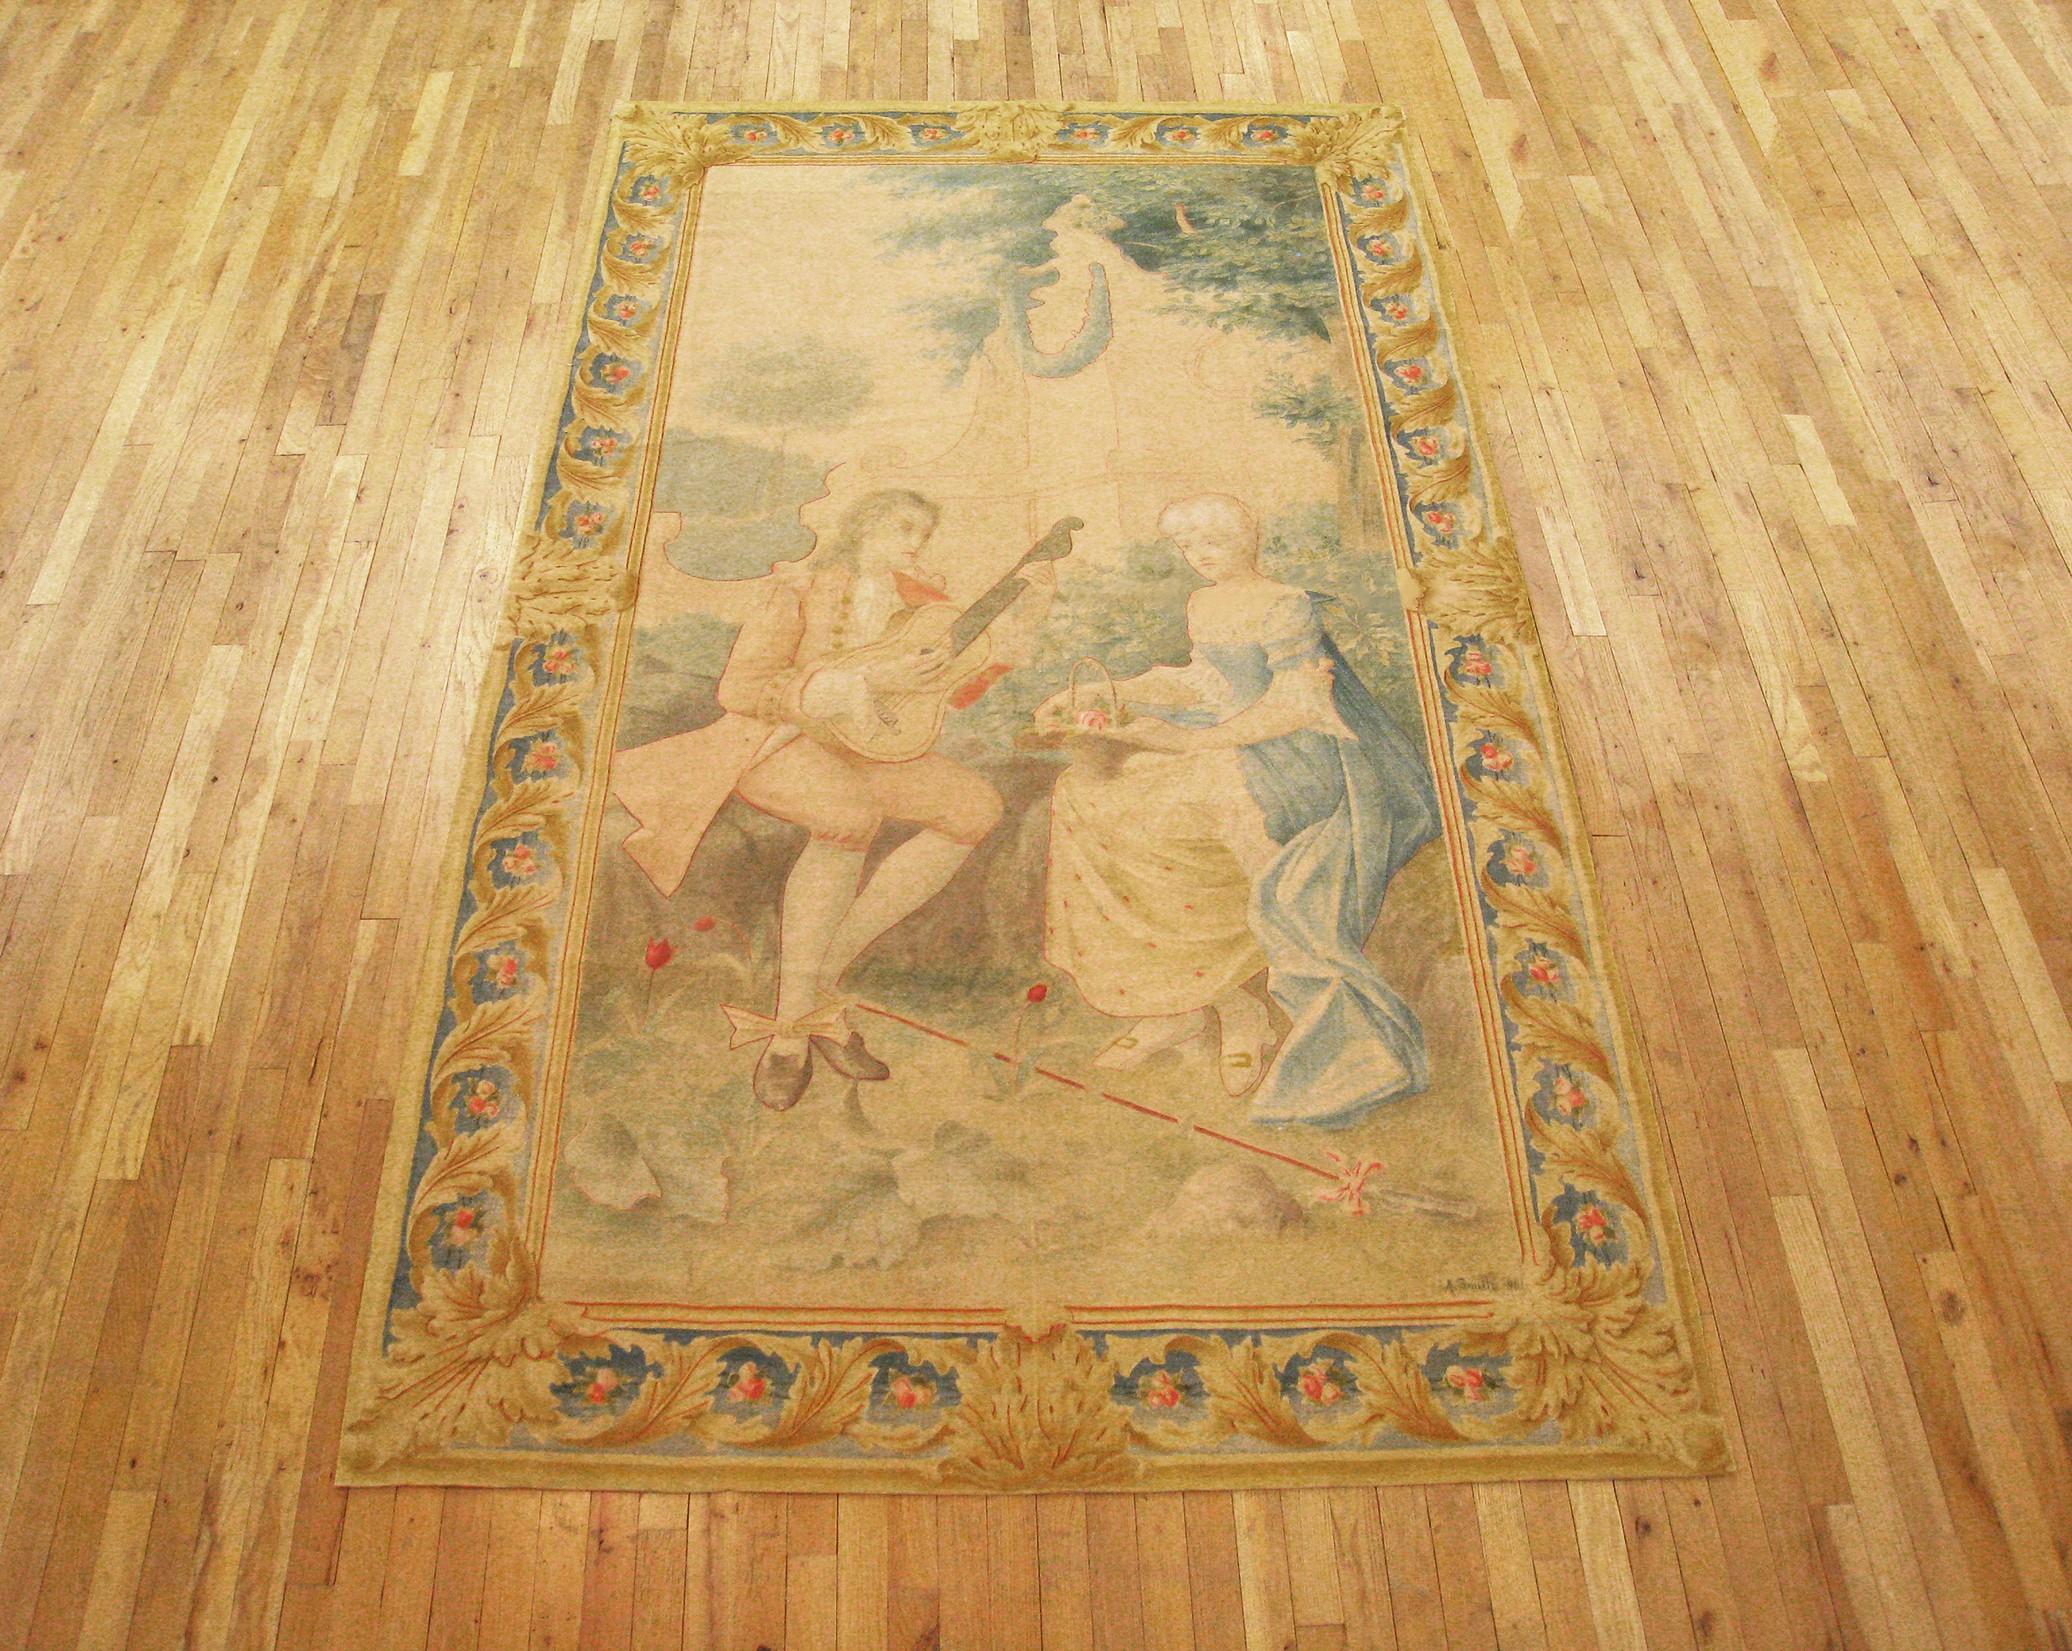 A French Aubusson tapestry from the late 19th century, depicting a man playing music for a woman in a verdant setting. Enclosed within an elegant scrolling acanthus leaf border. Wool. Measures: 9’5”H x 5’5”W

Hanging: The tapestry comes ready for